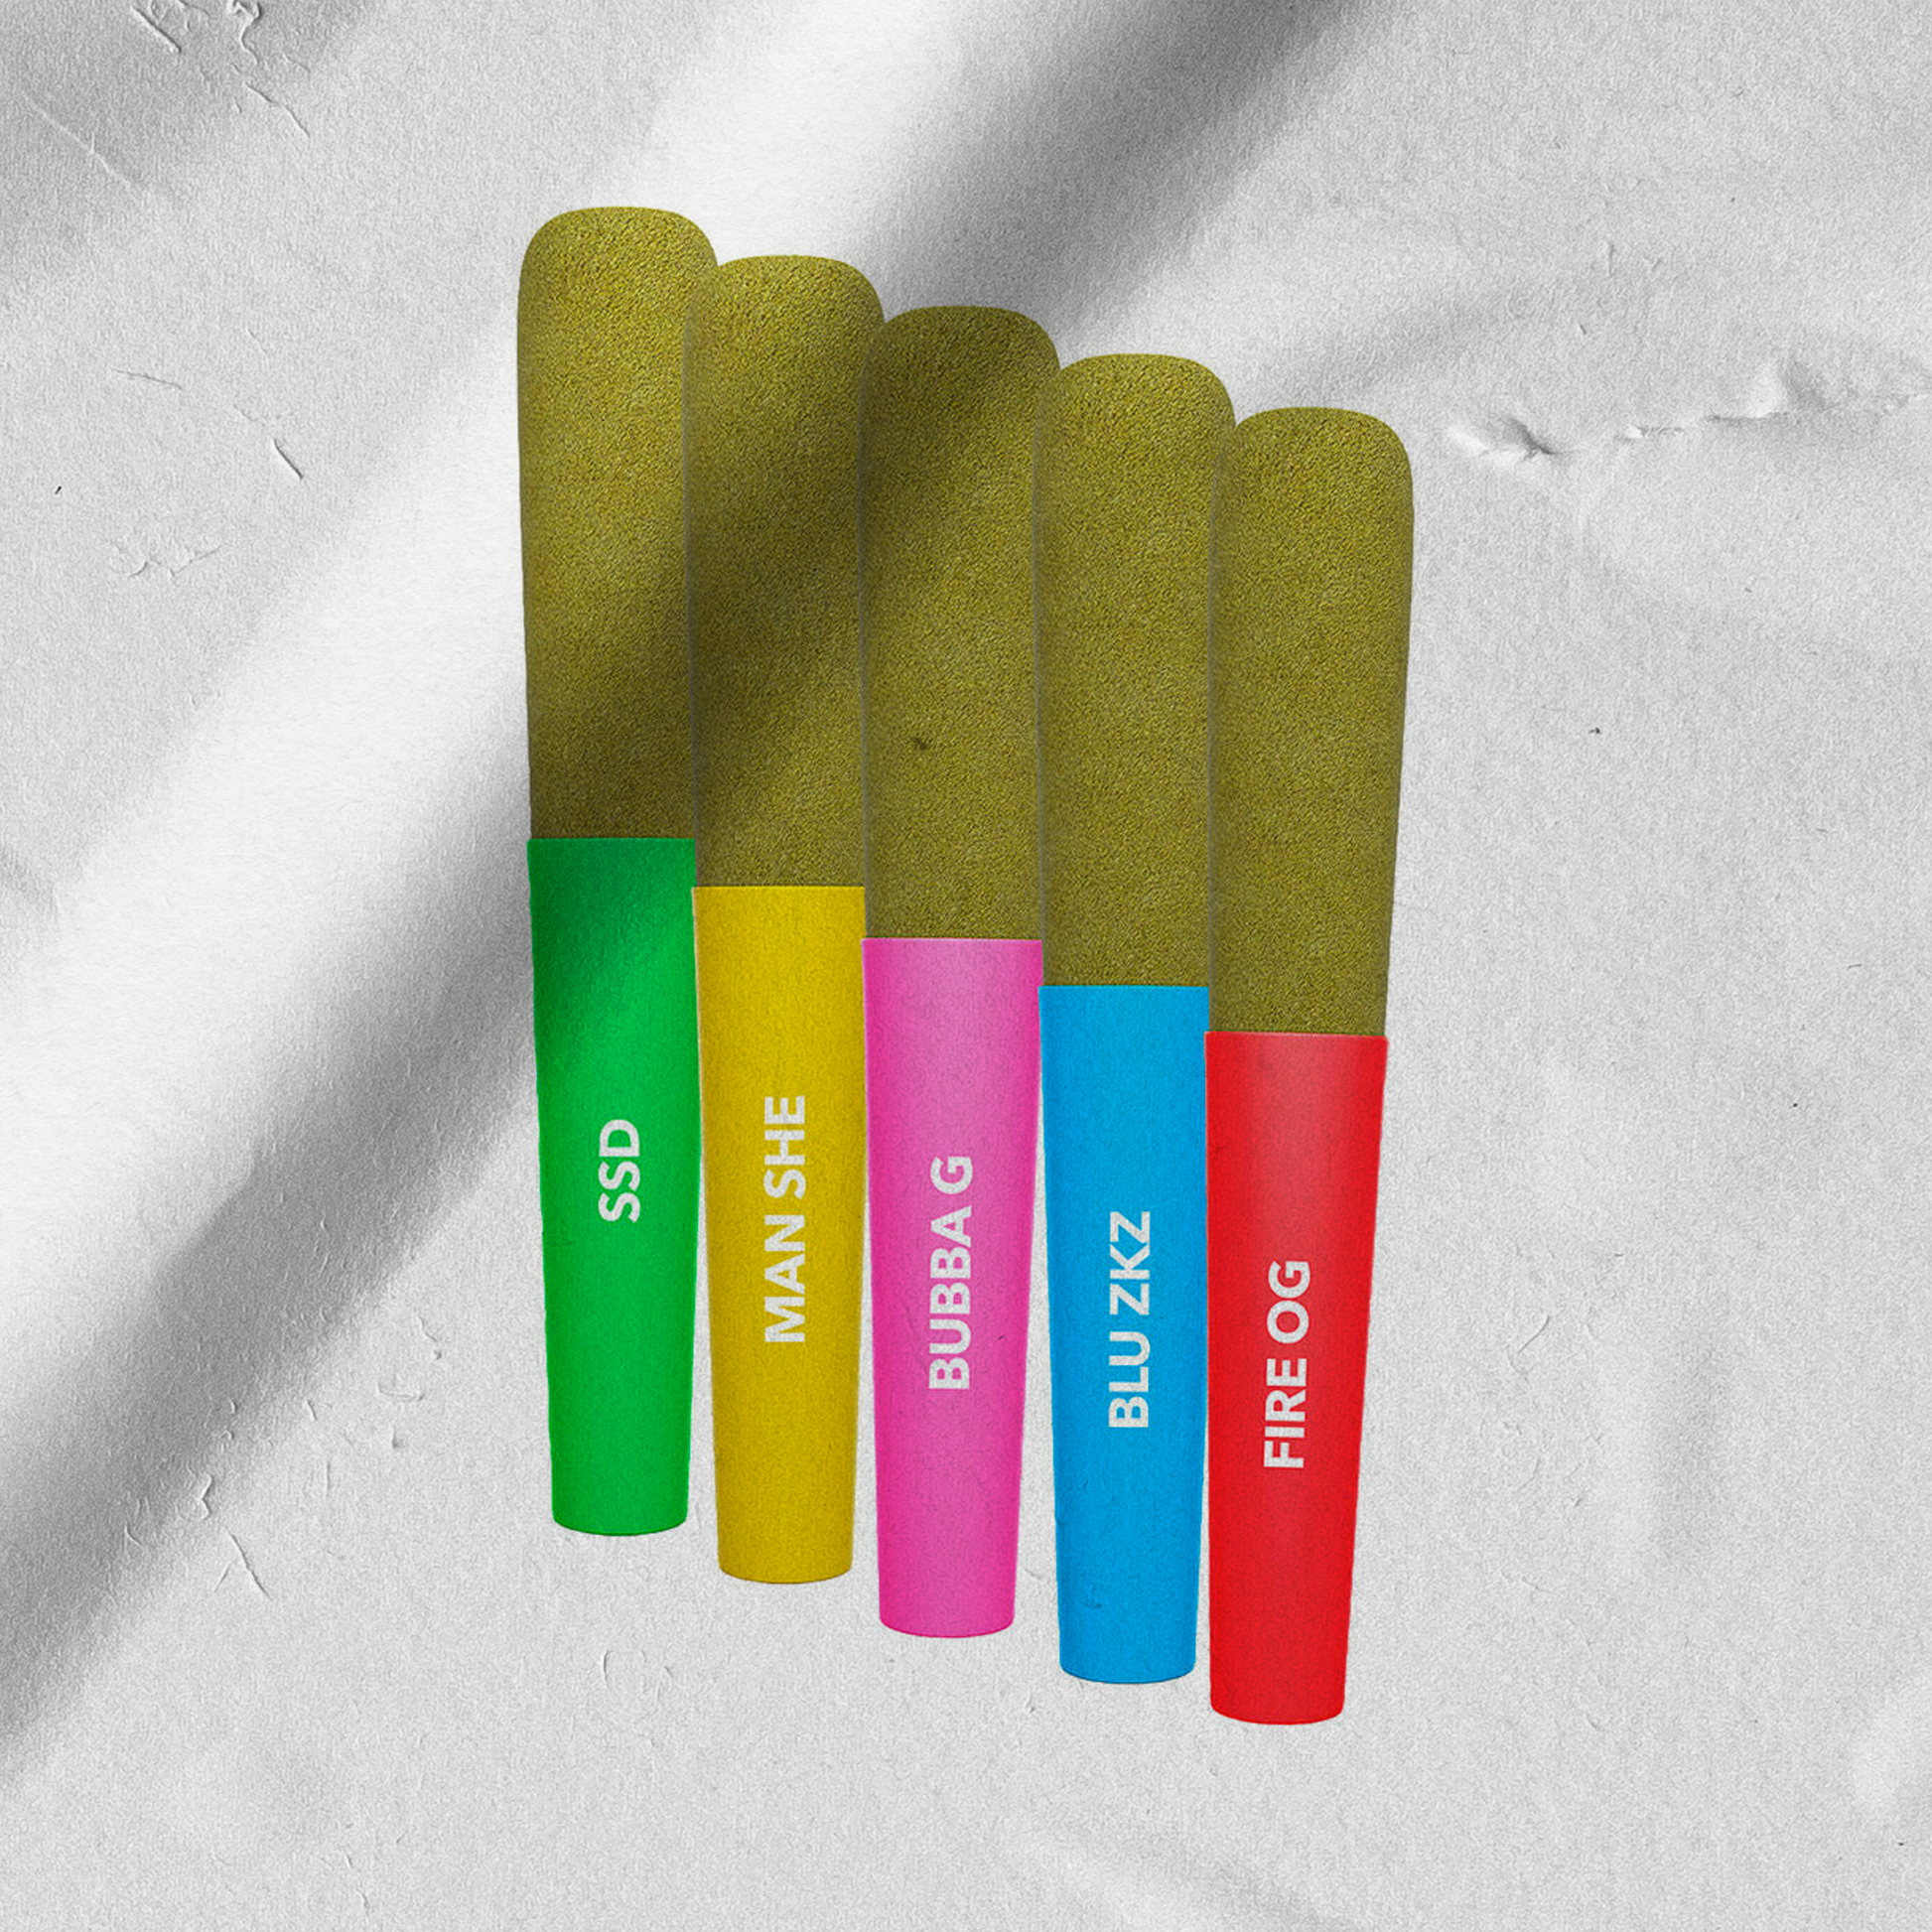 jeeter pre-rolls available for free 1-hour marijuana delivery